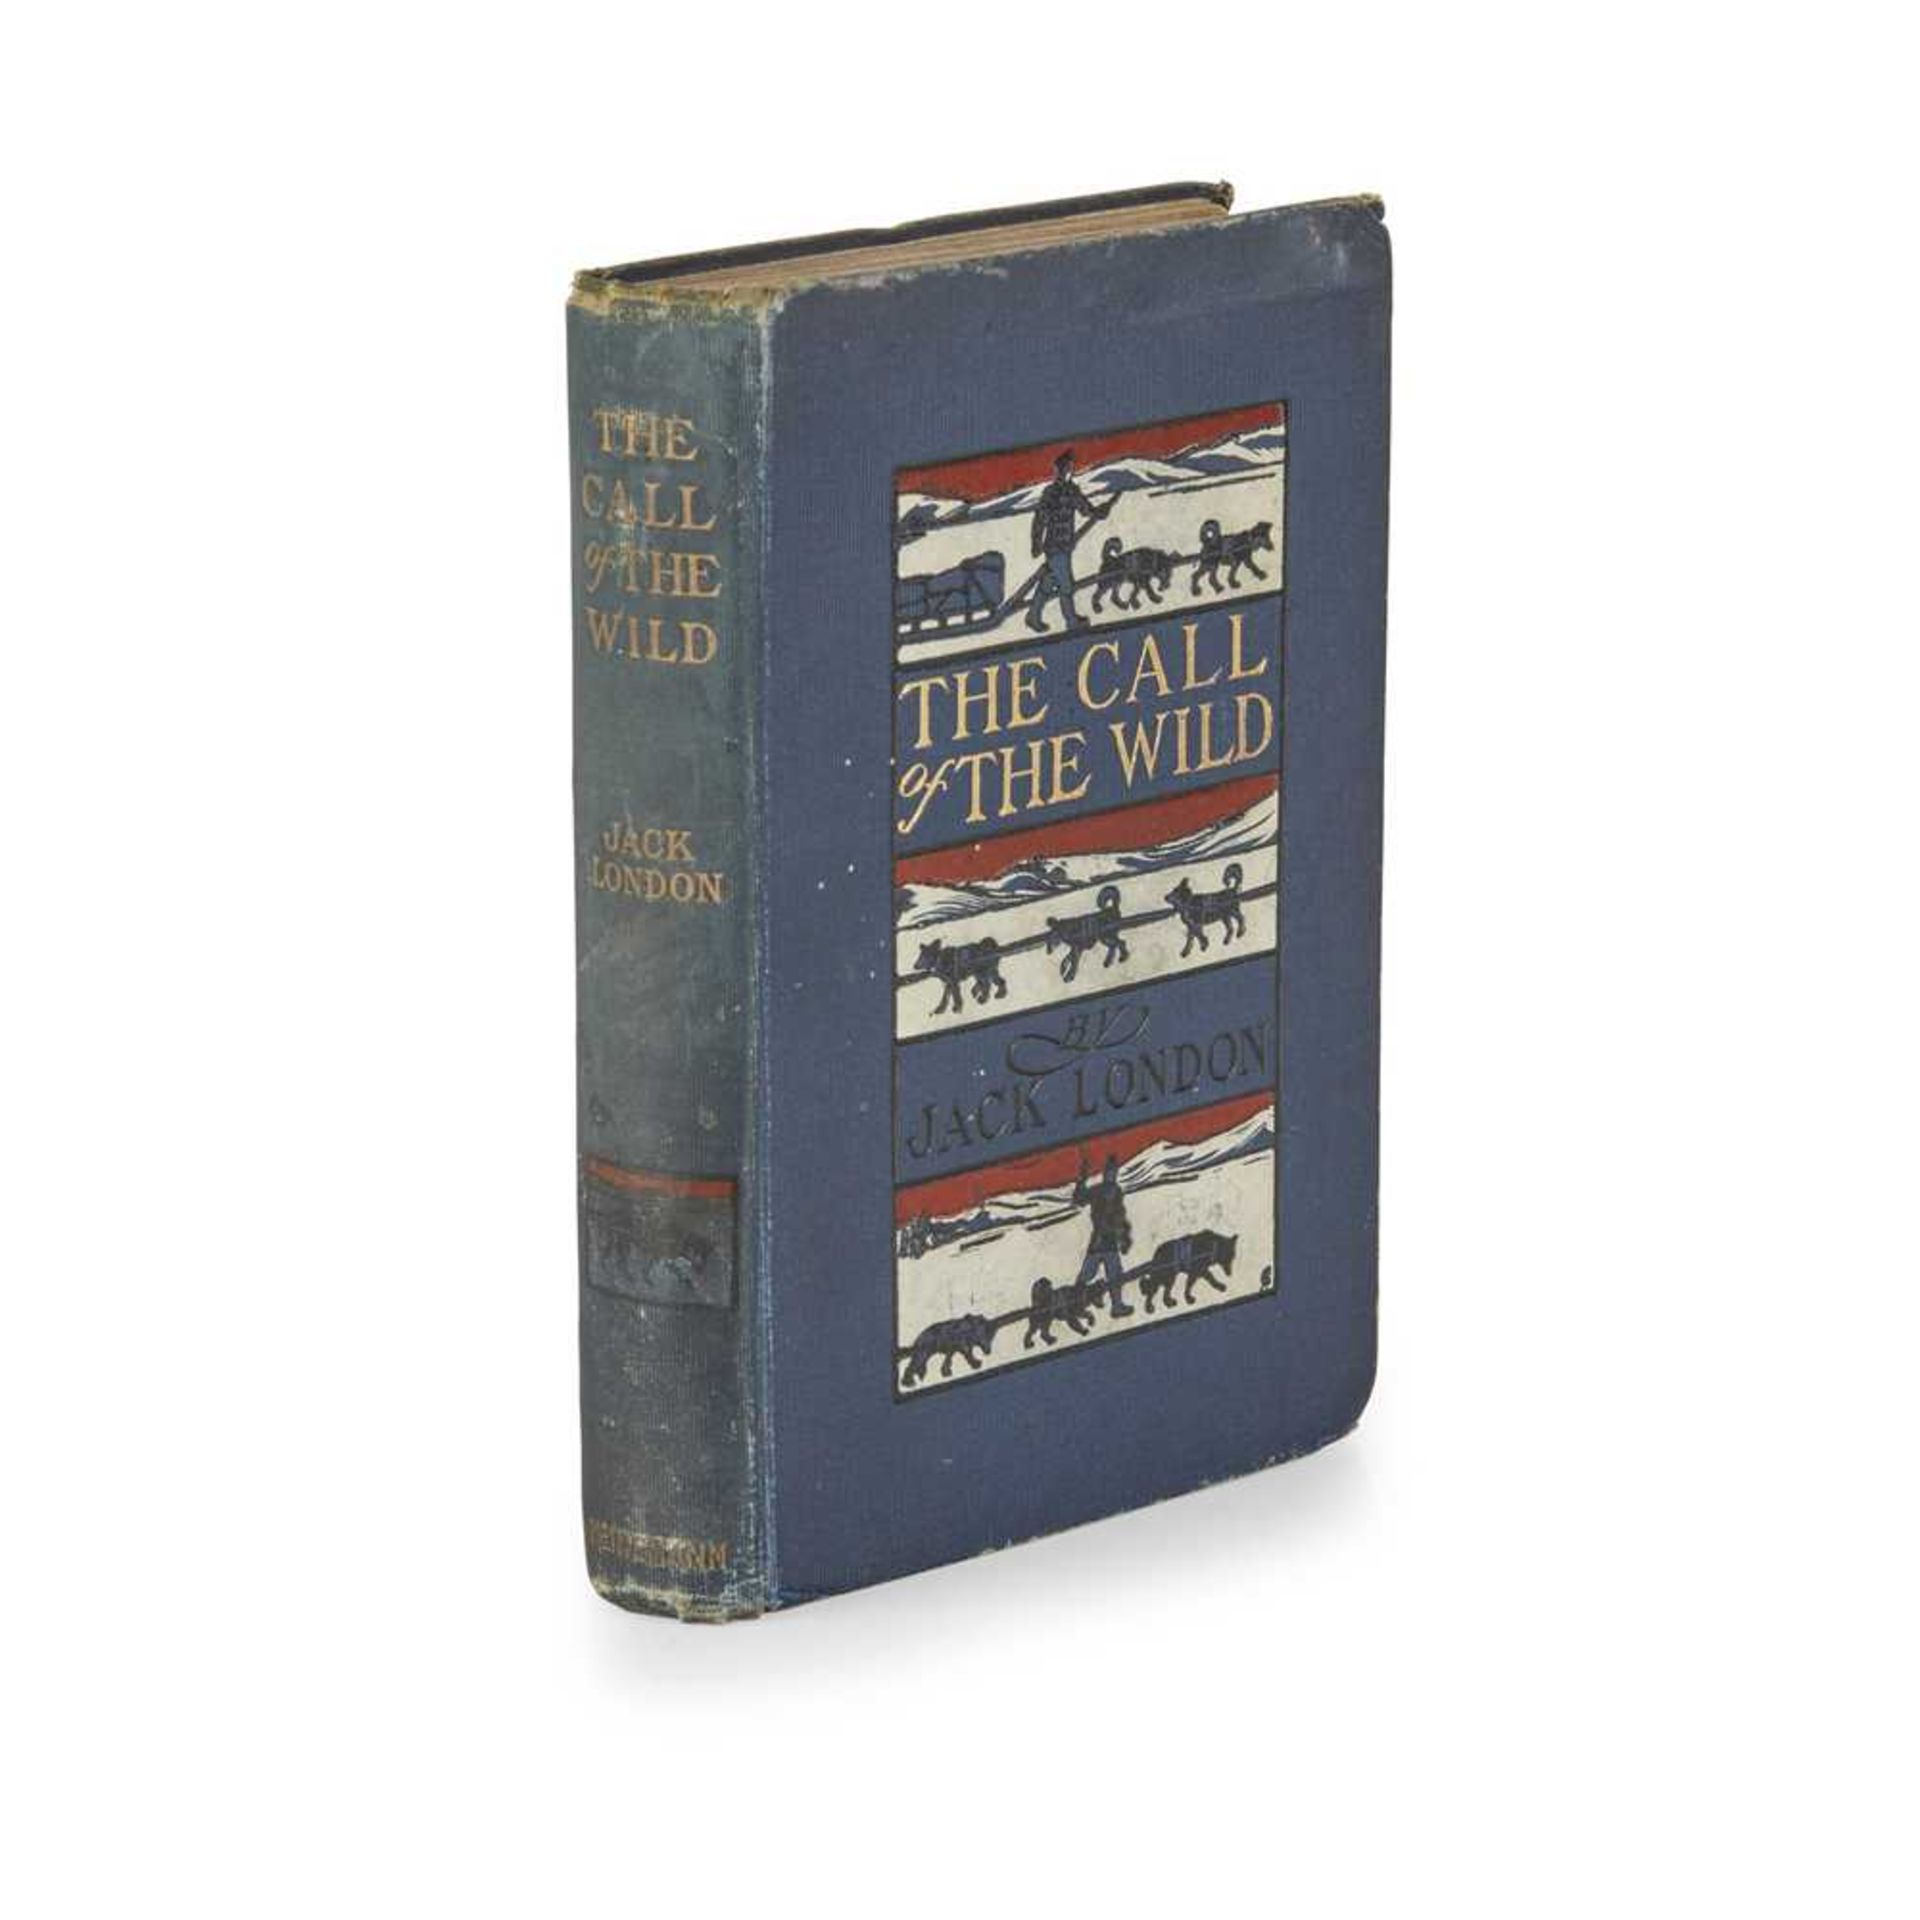 London, Jack The Call of the Wild London: William Heinemann, 1903. First UK edition, first